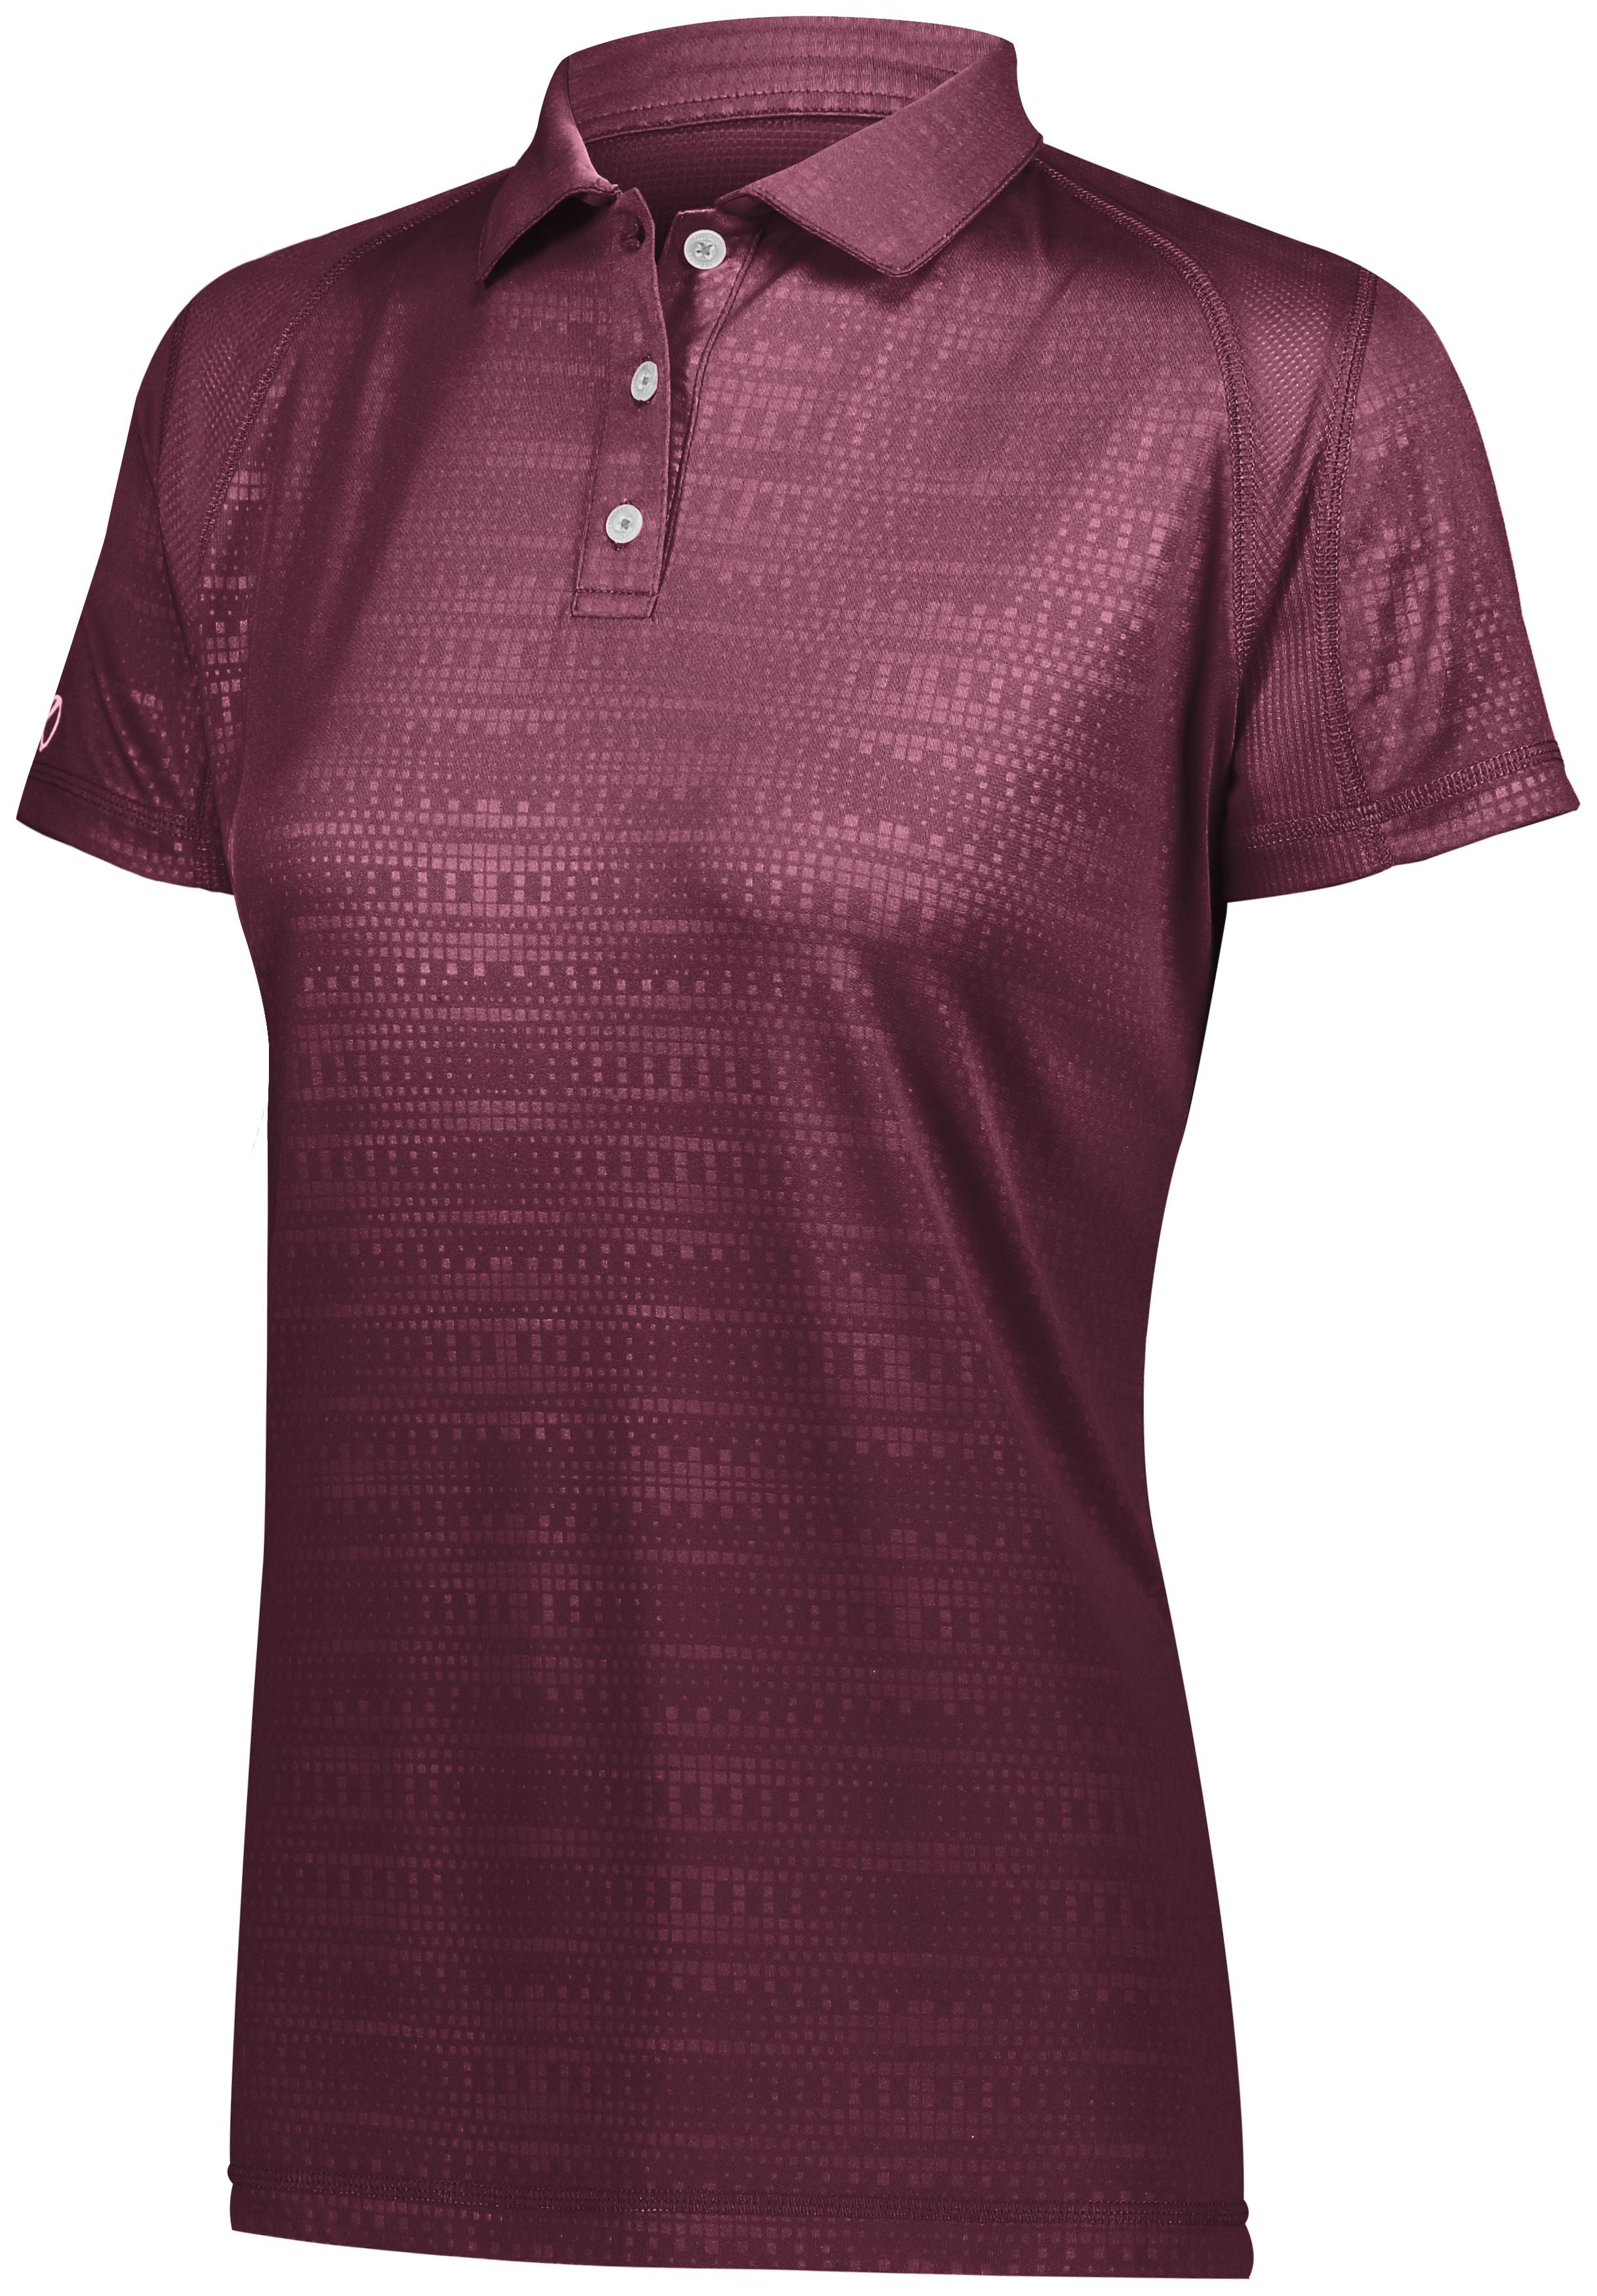 Holloway Ladies Converge Polo in Maroon (Hlw)  -Part of the Ladies, Ladies-Polo, Polos, Holloway, Shirts, Converge-Collection product lines at KanaleyCreations.com